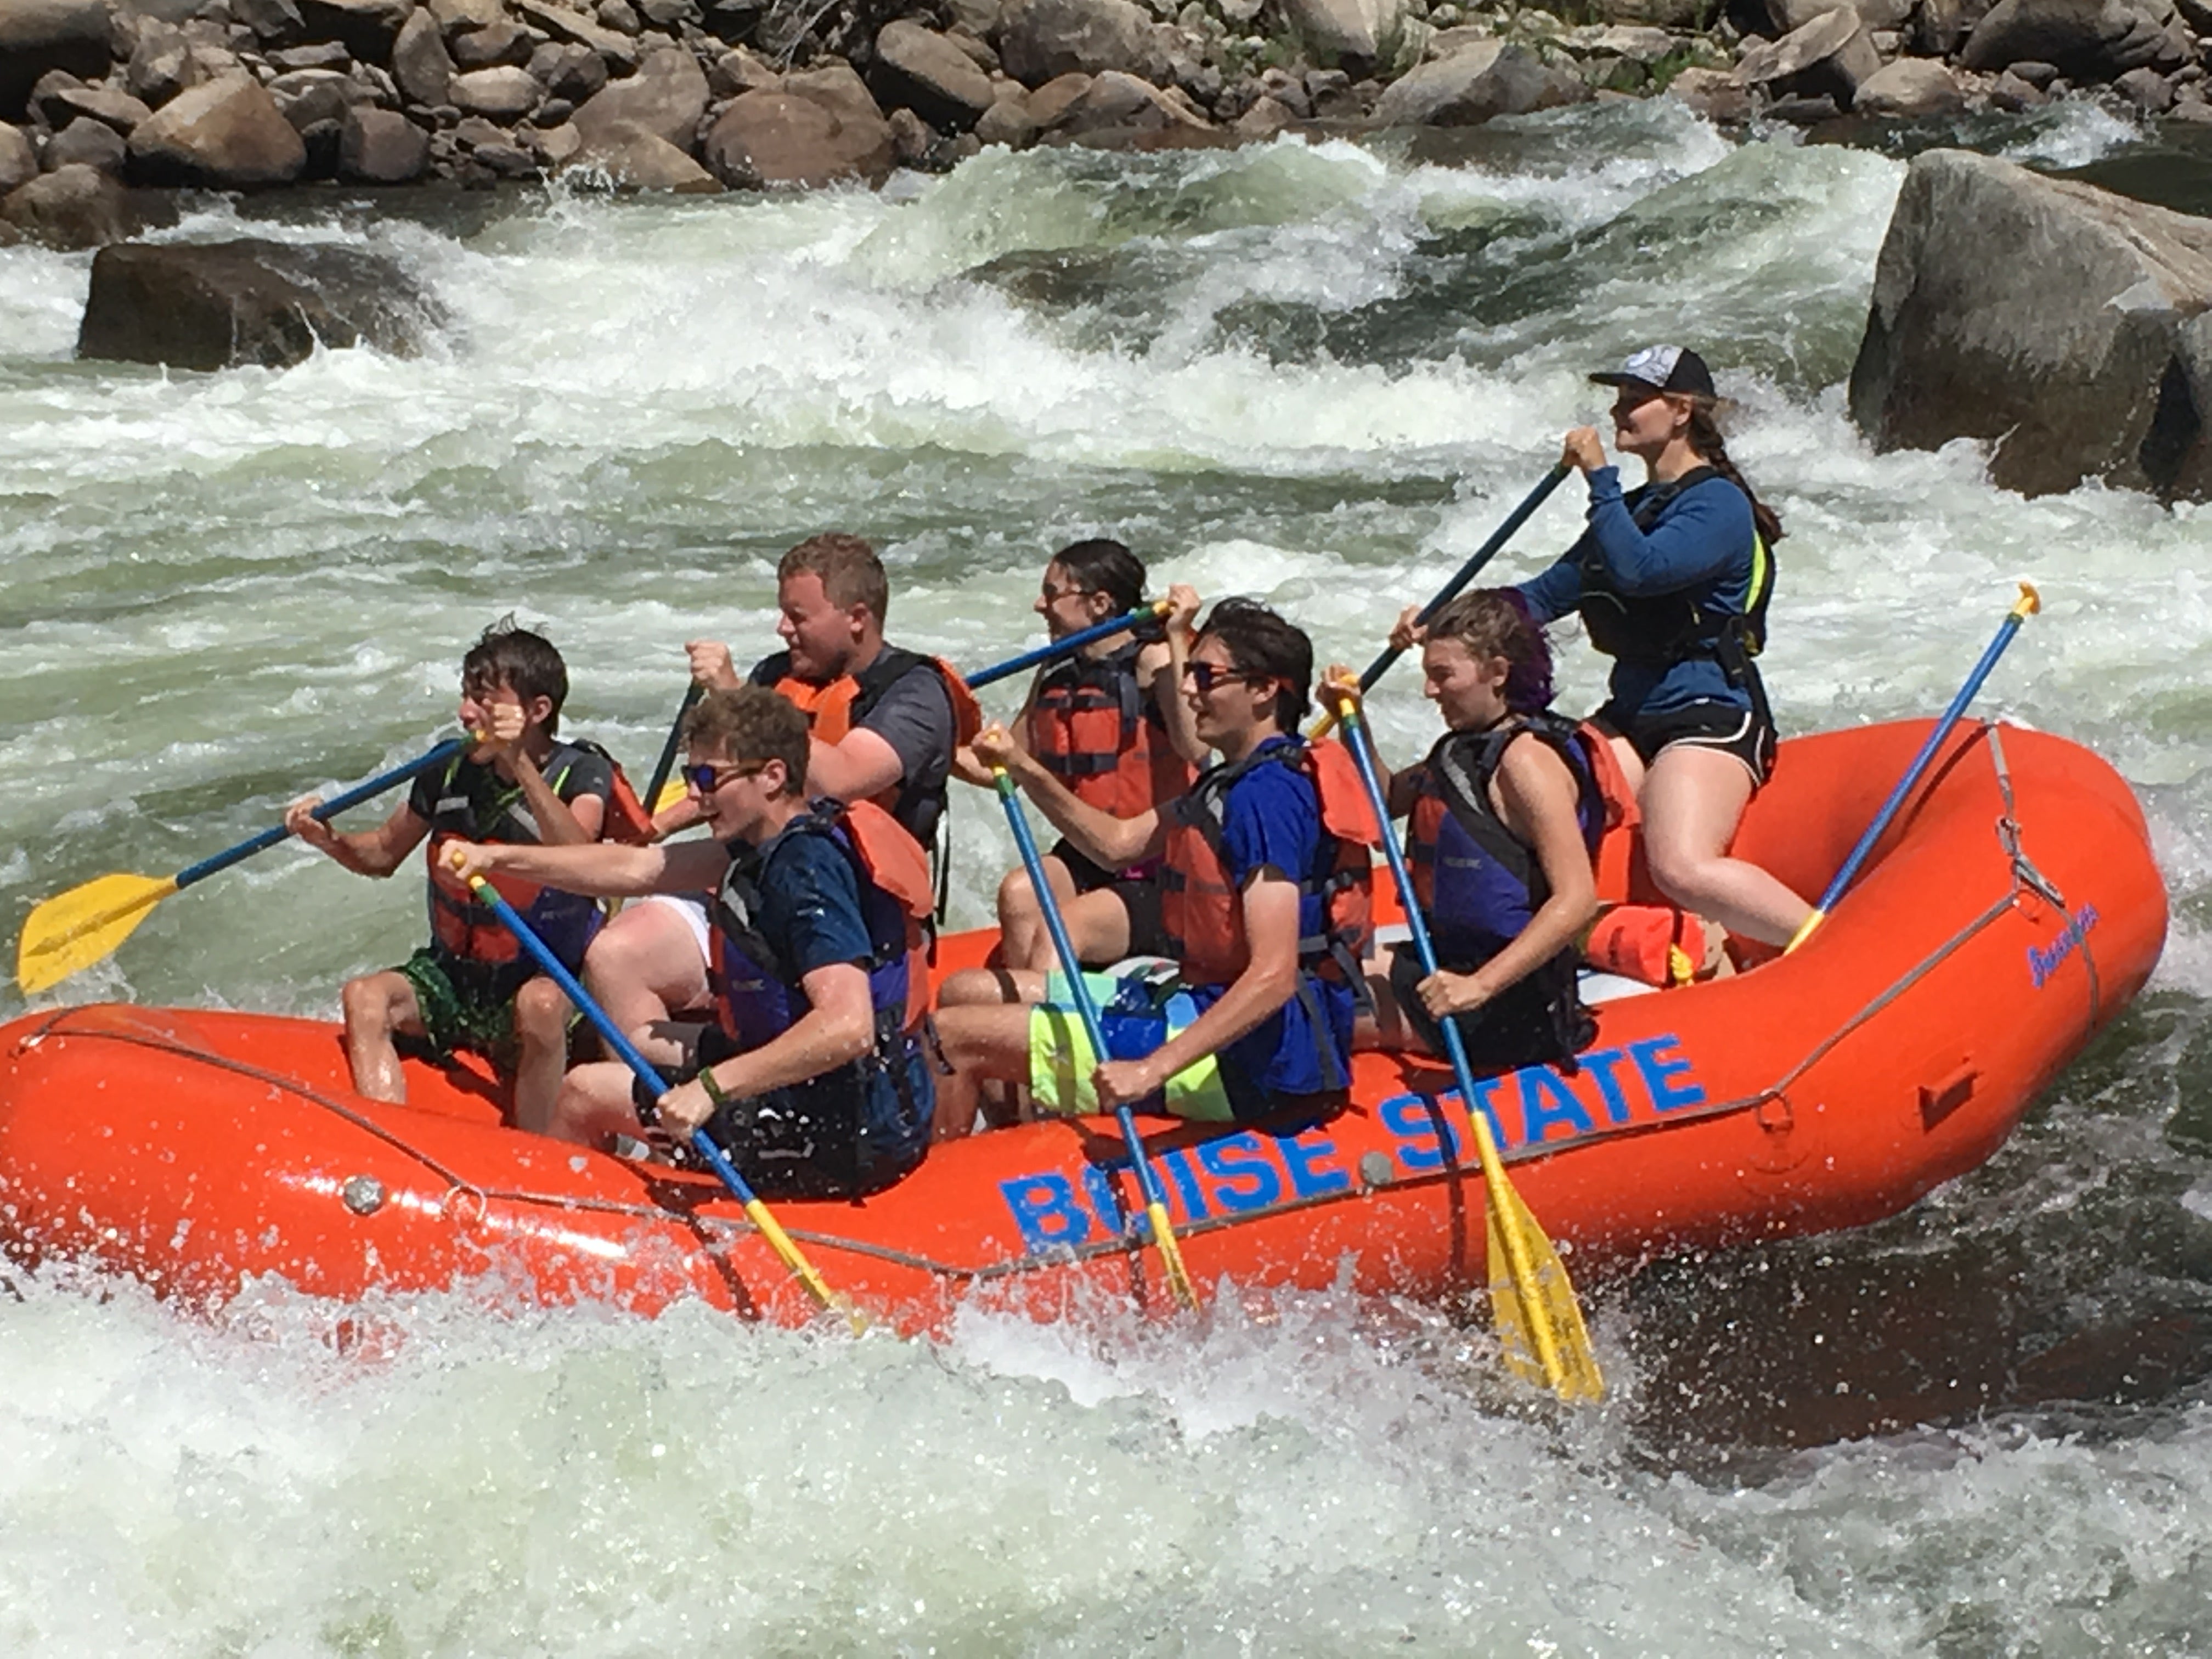 Students rafting down whitewater on the Payette River.